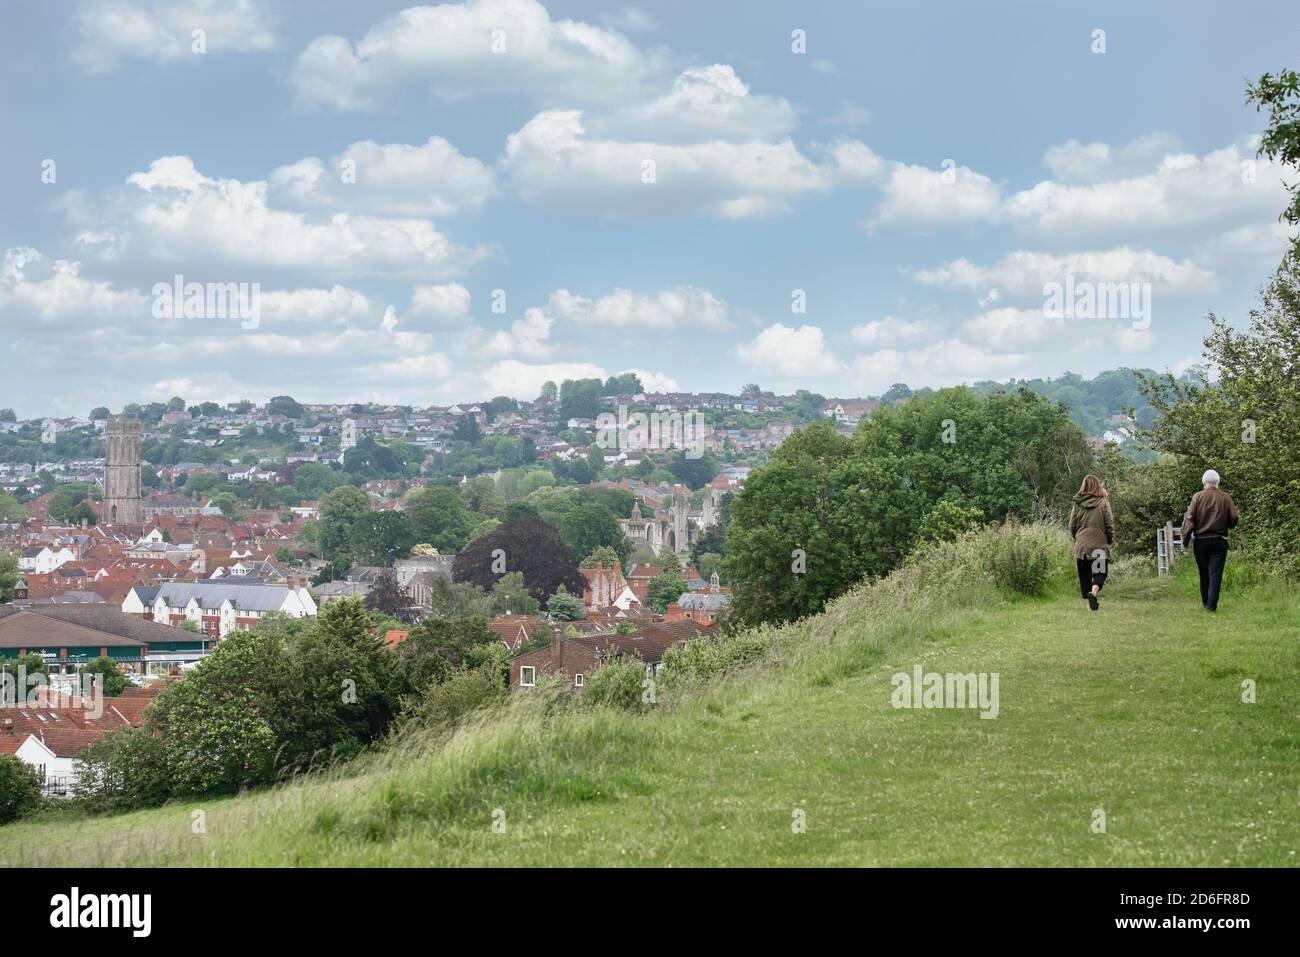 Walking the countryside overlooking Glastonbury town, England. A beautiful summer day, blue sky, white clouds. Stock Photo